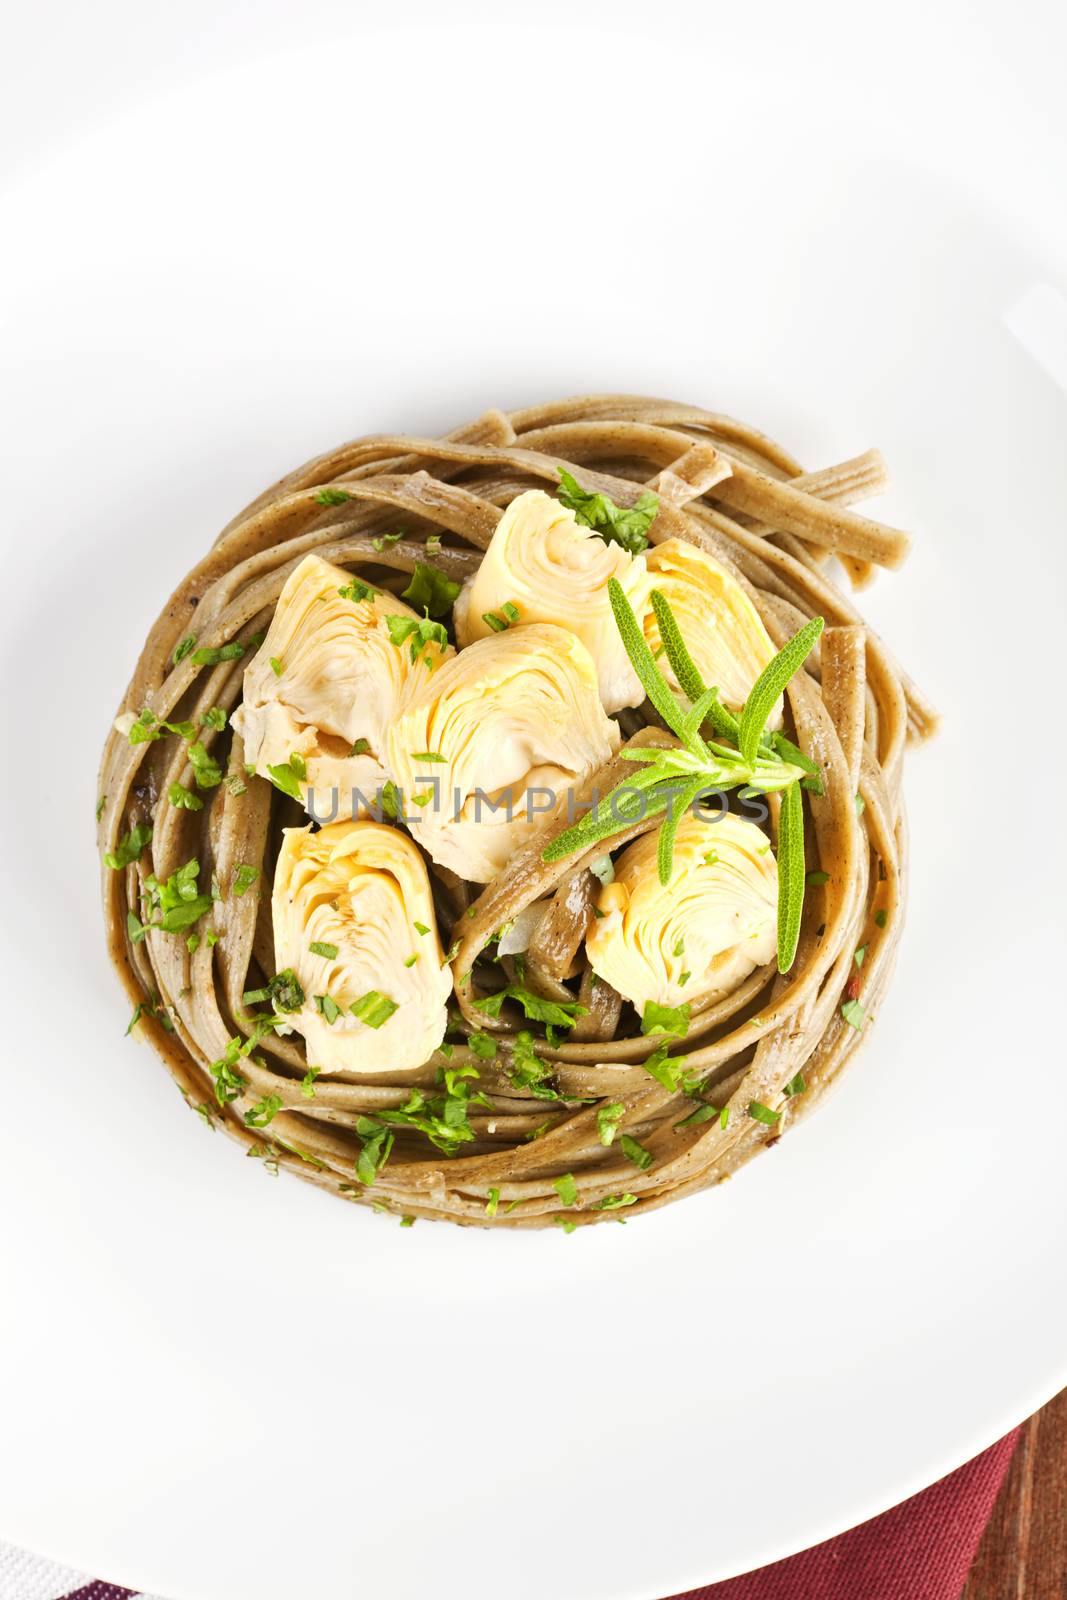 Luxurious tagliatelle with artichokes and fresh herbs on white plate. Luxury dining.